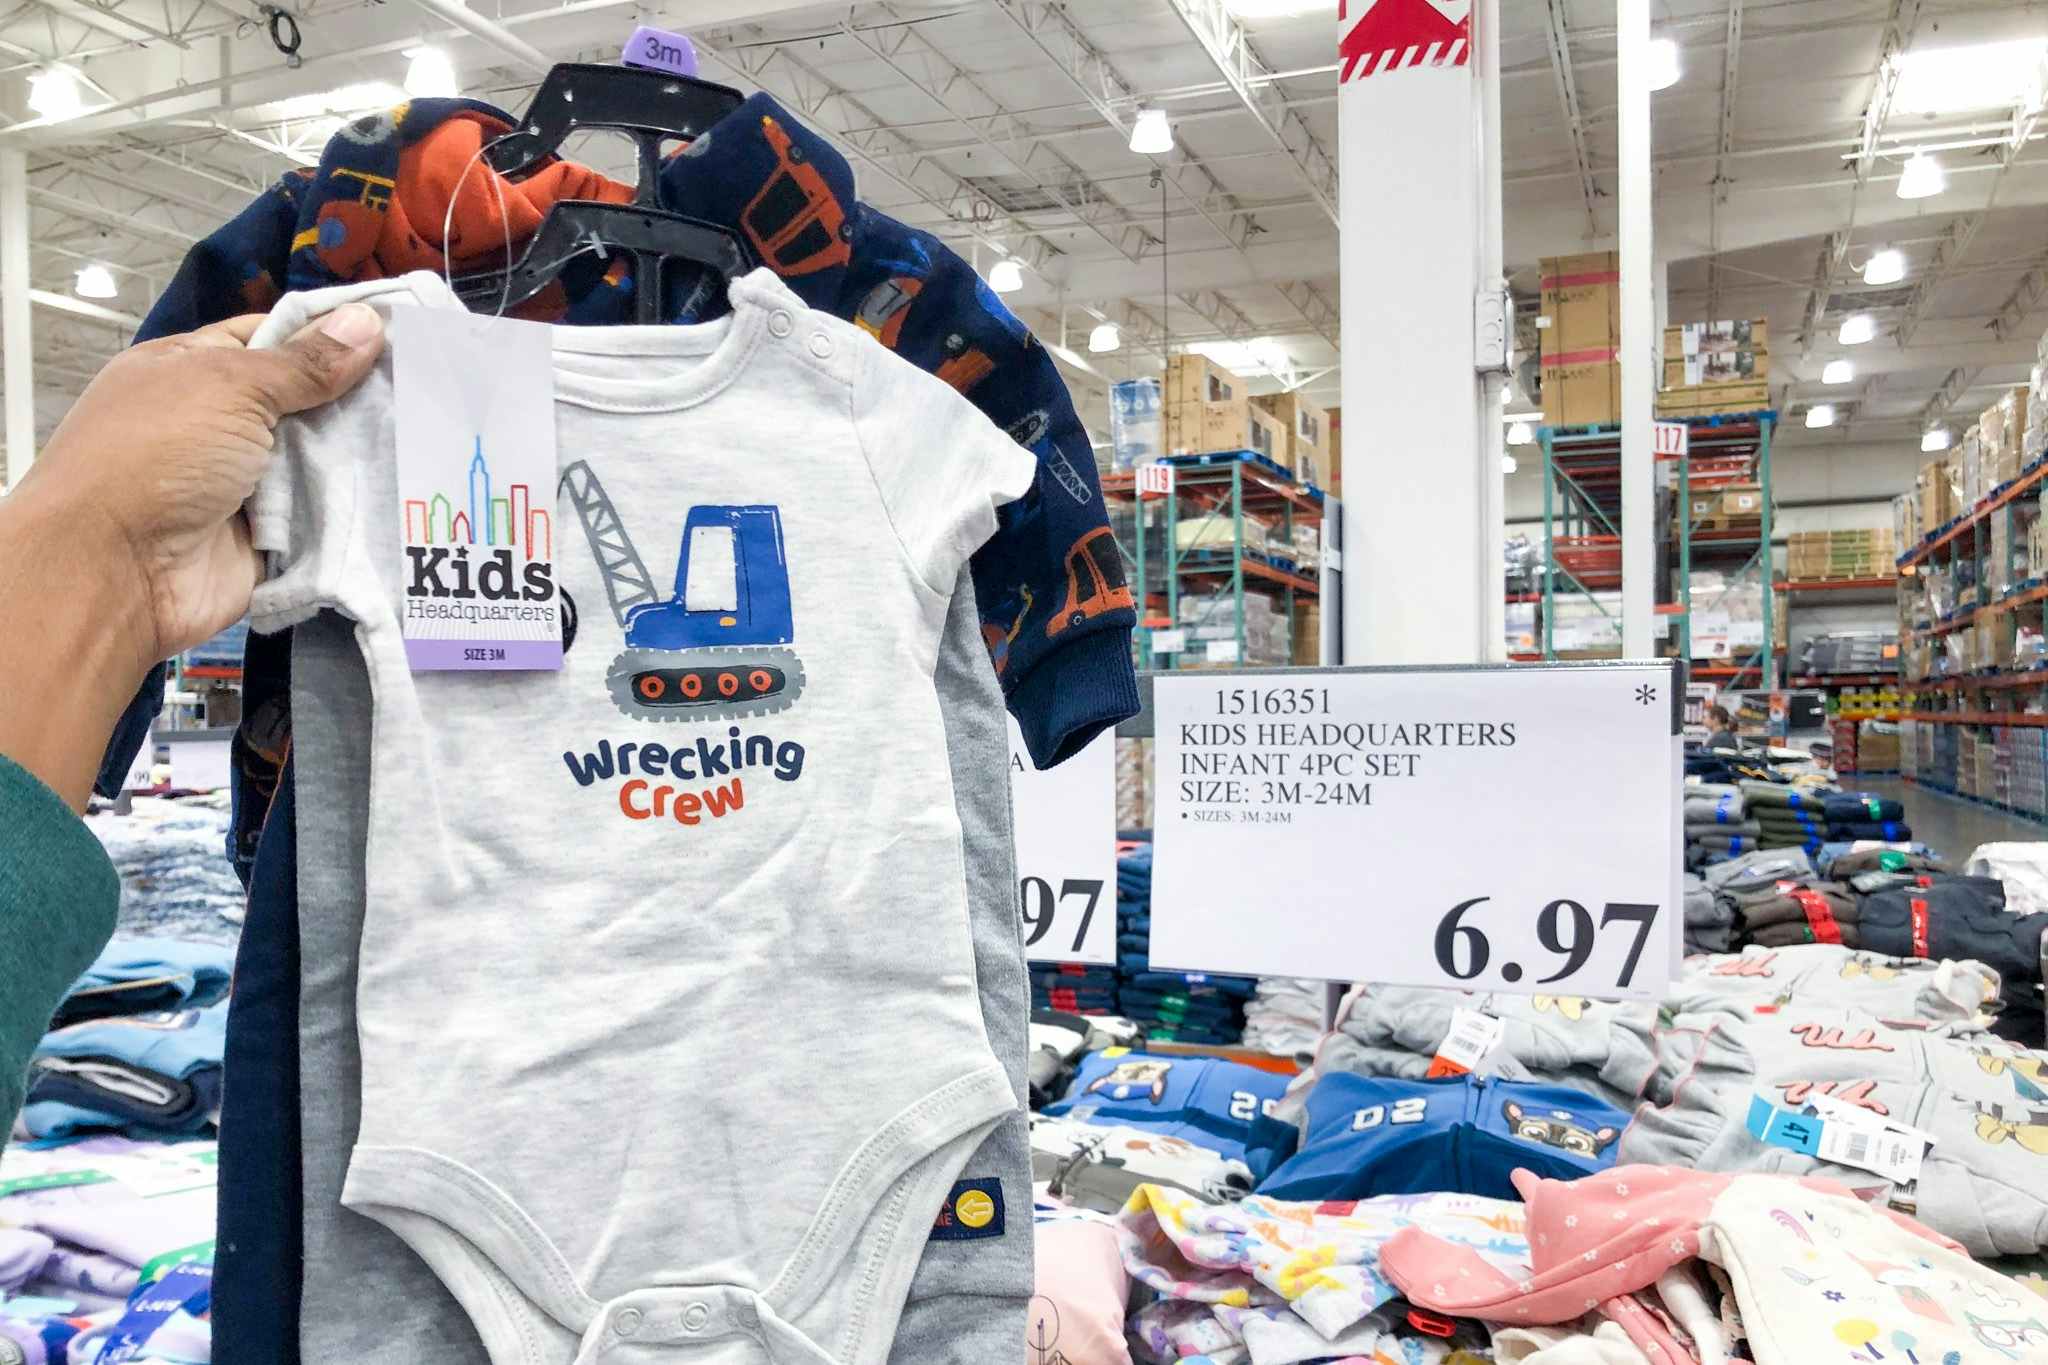 Costco Clearance Deal: Kid's Headquarters Infant 4-Piece Set, Only $6.97